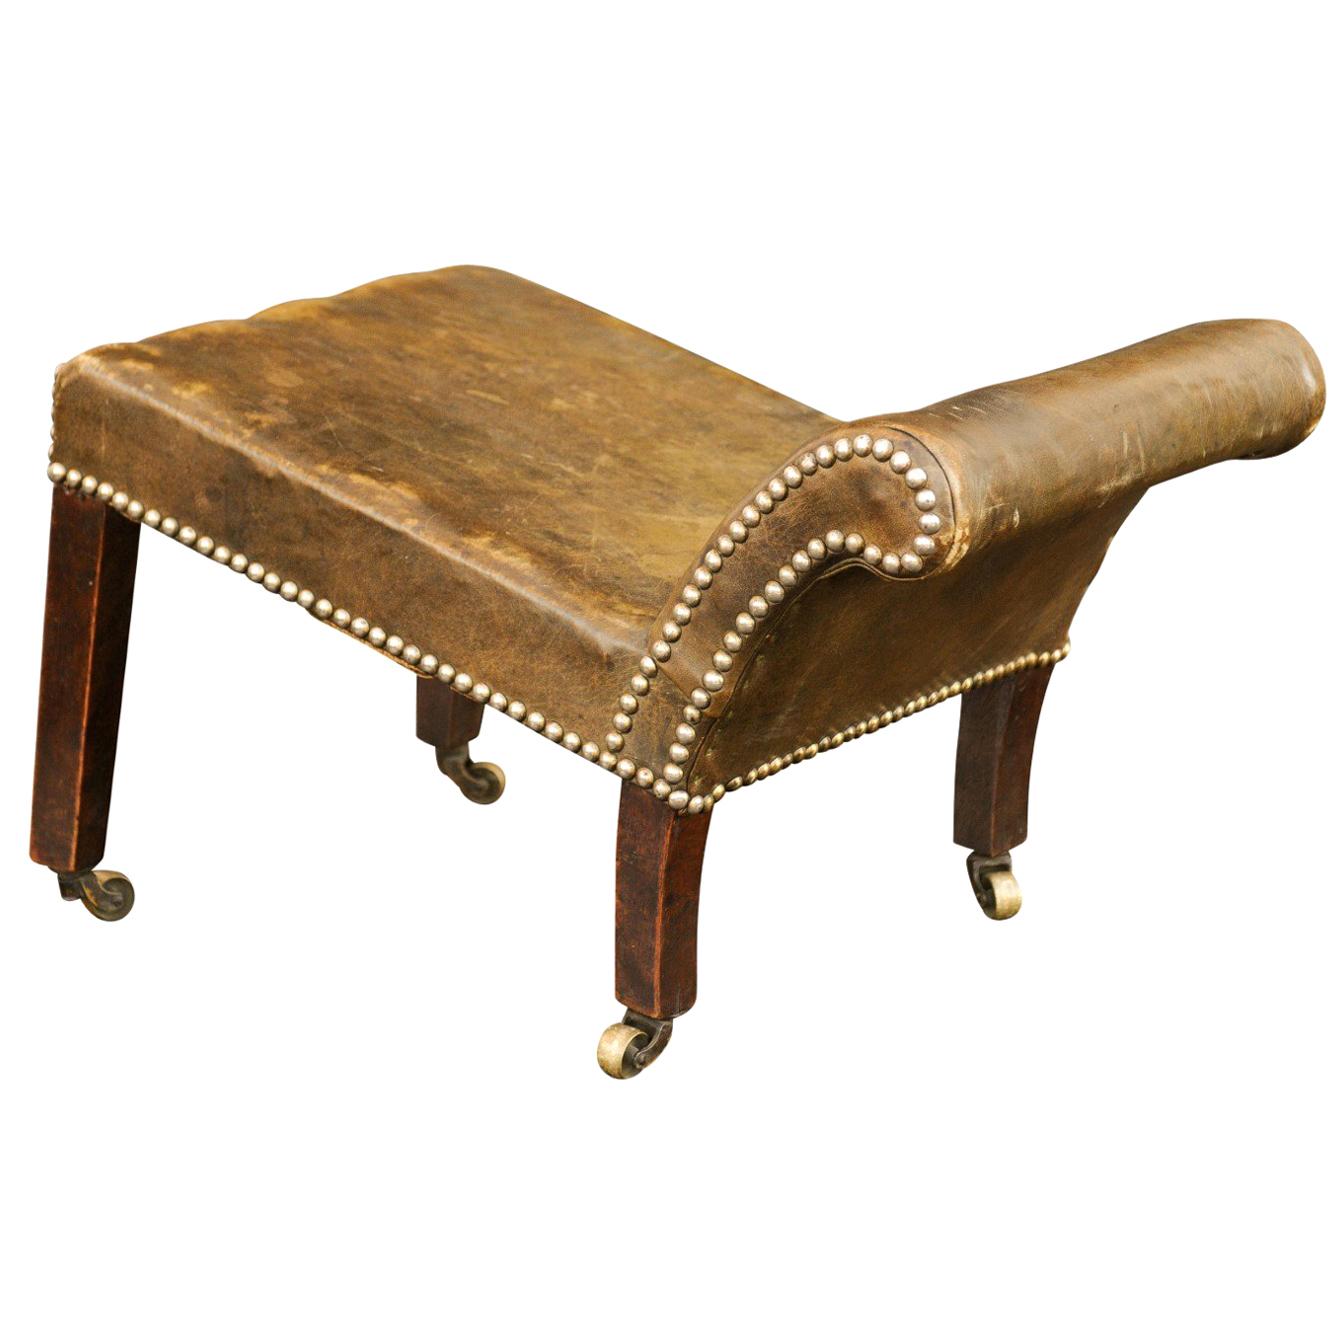 English 1920s Leather Gout Stool with Out-Scrolling Back, Nailheads and Casters